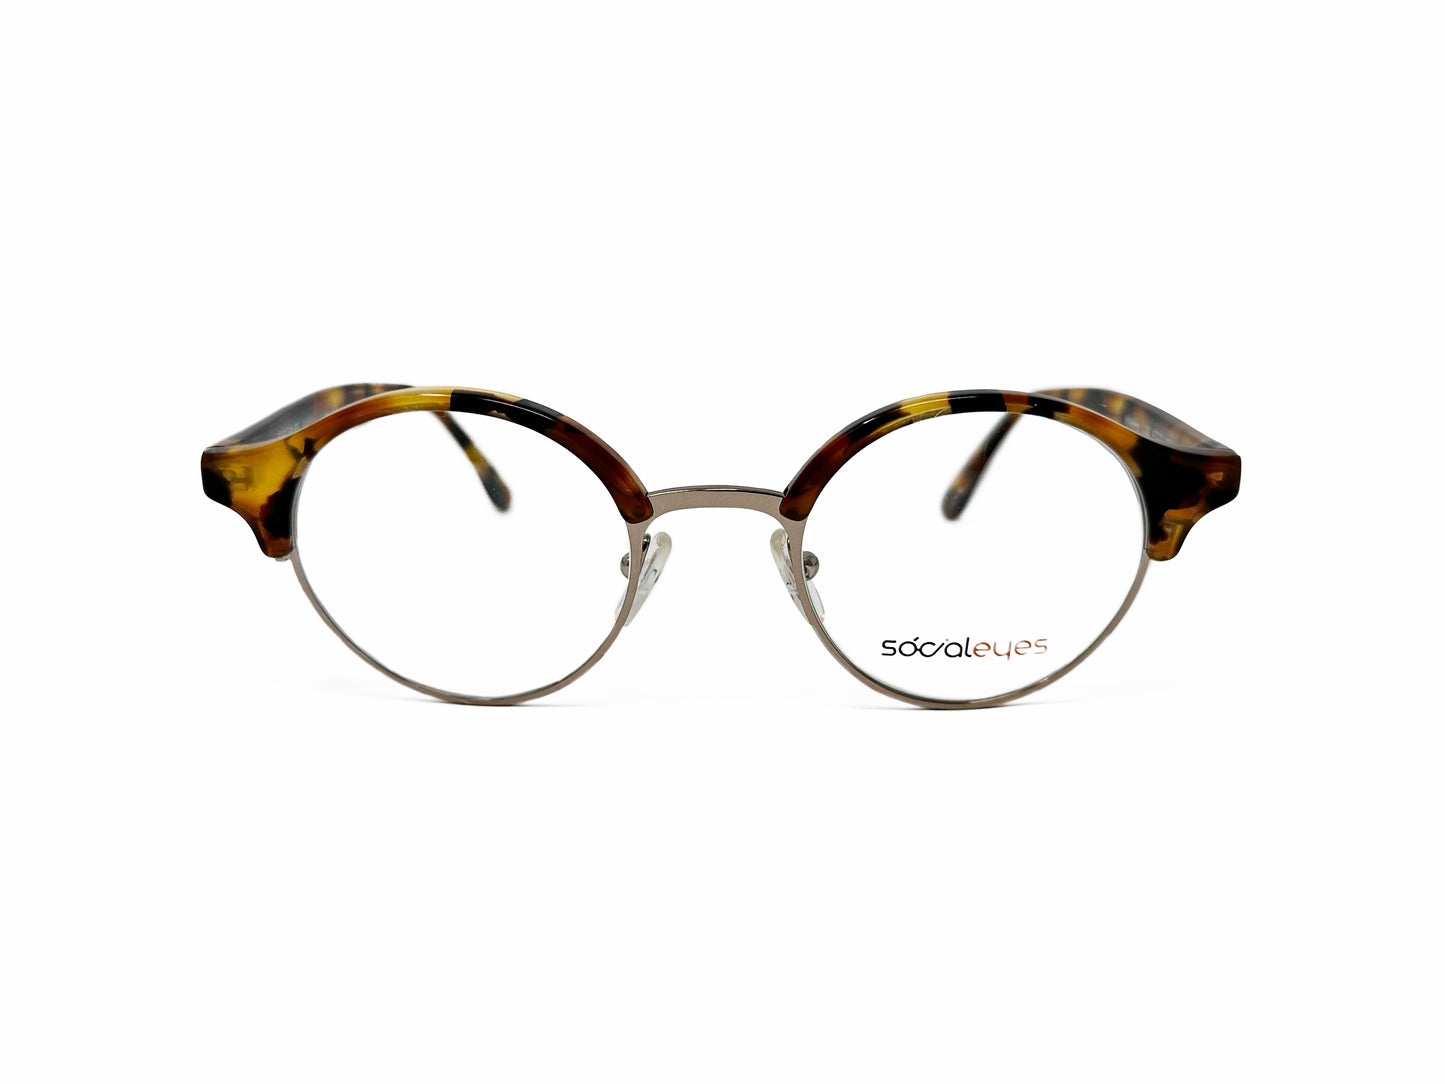 Social Eyes round metal, with acetate trim, optical frame. Model: Benny. Color: C02 - Japanese Havana. Front view.